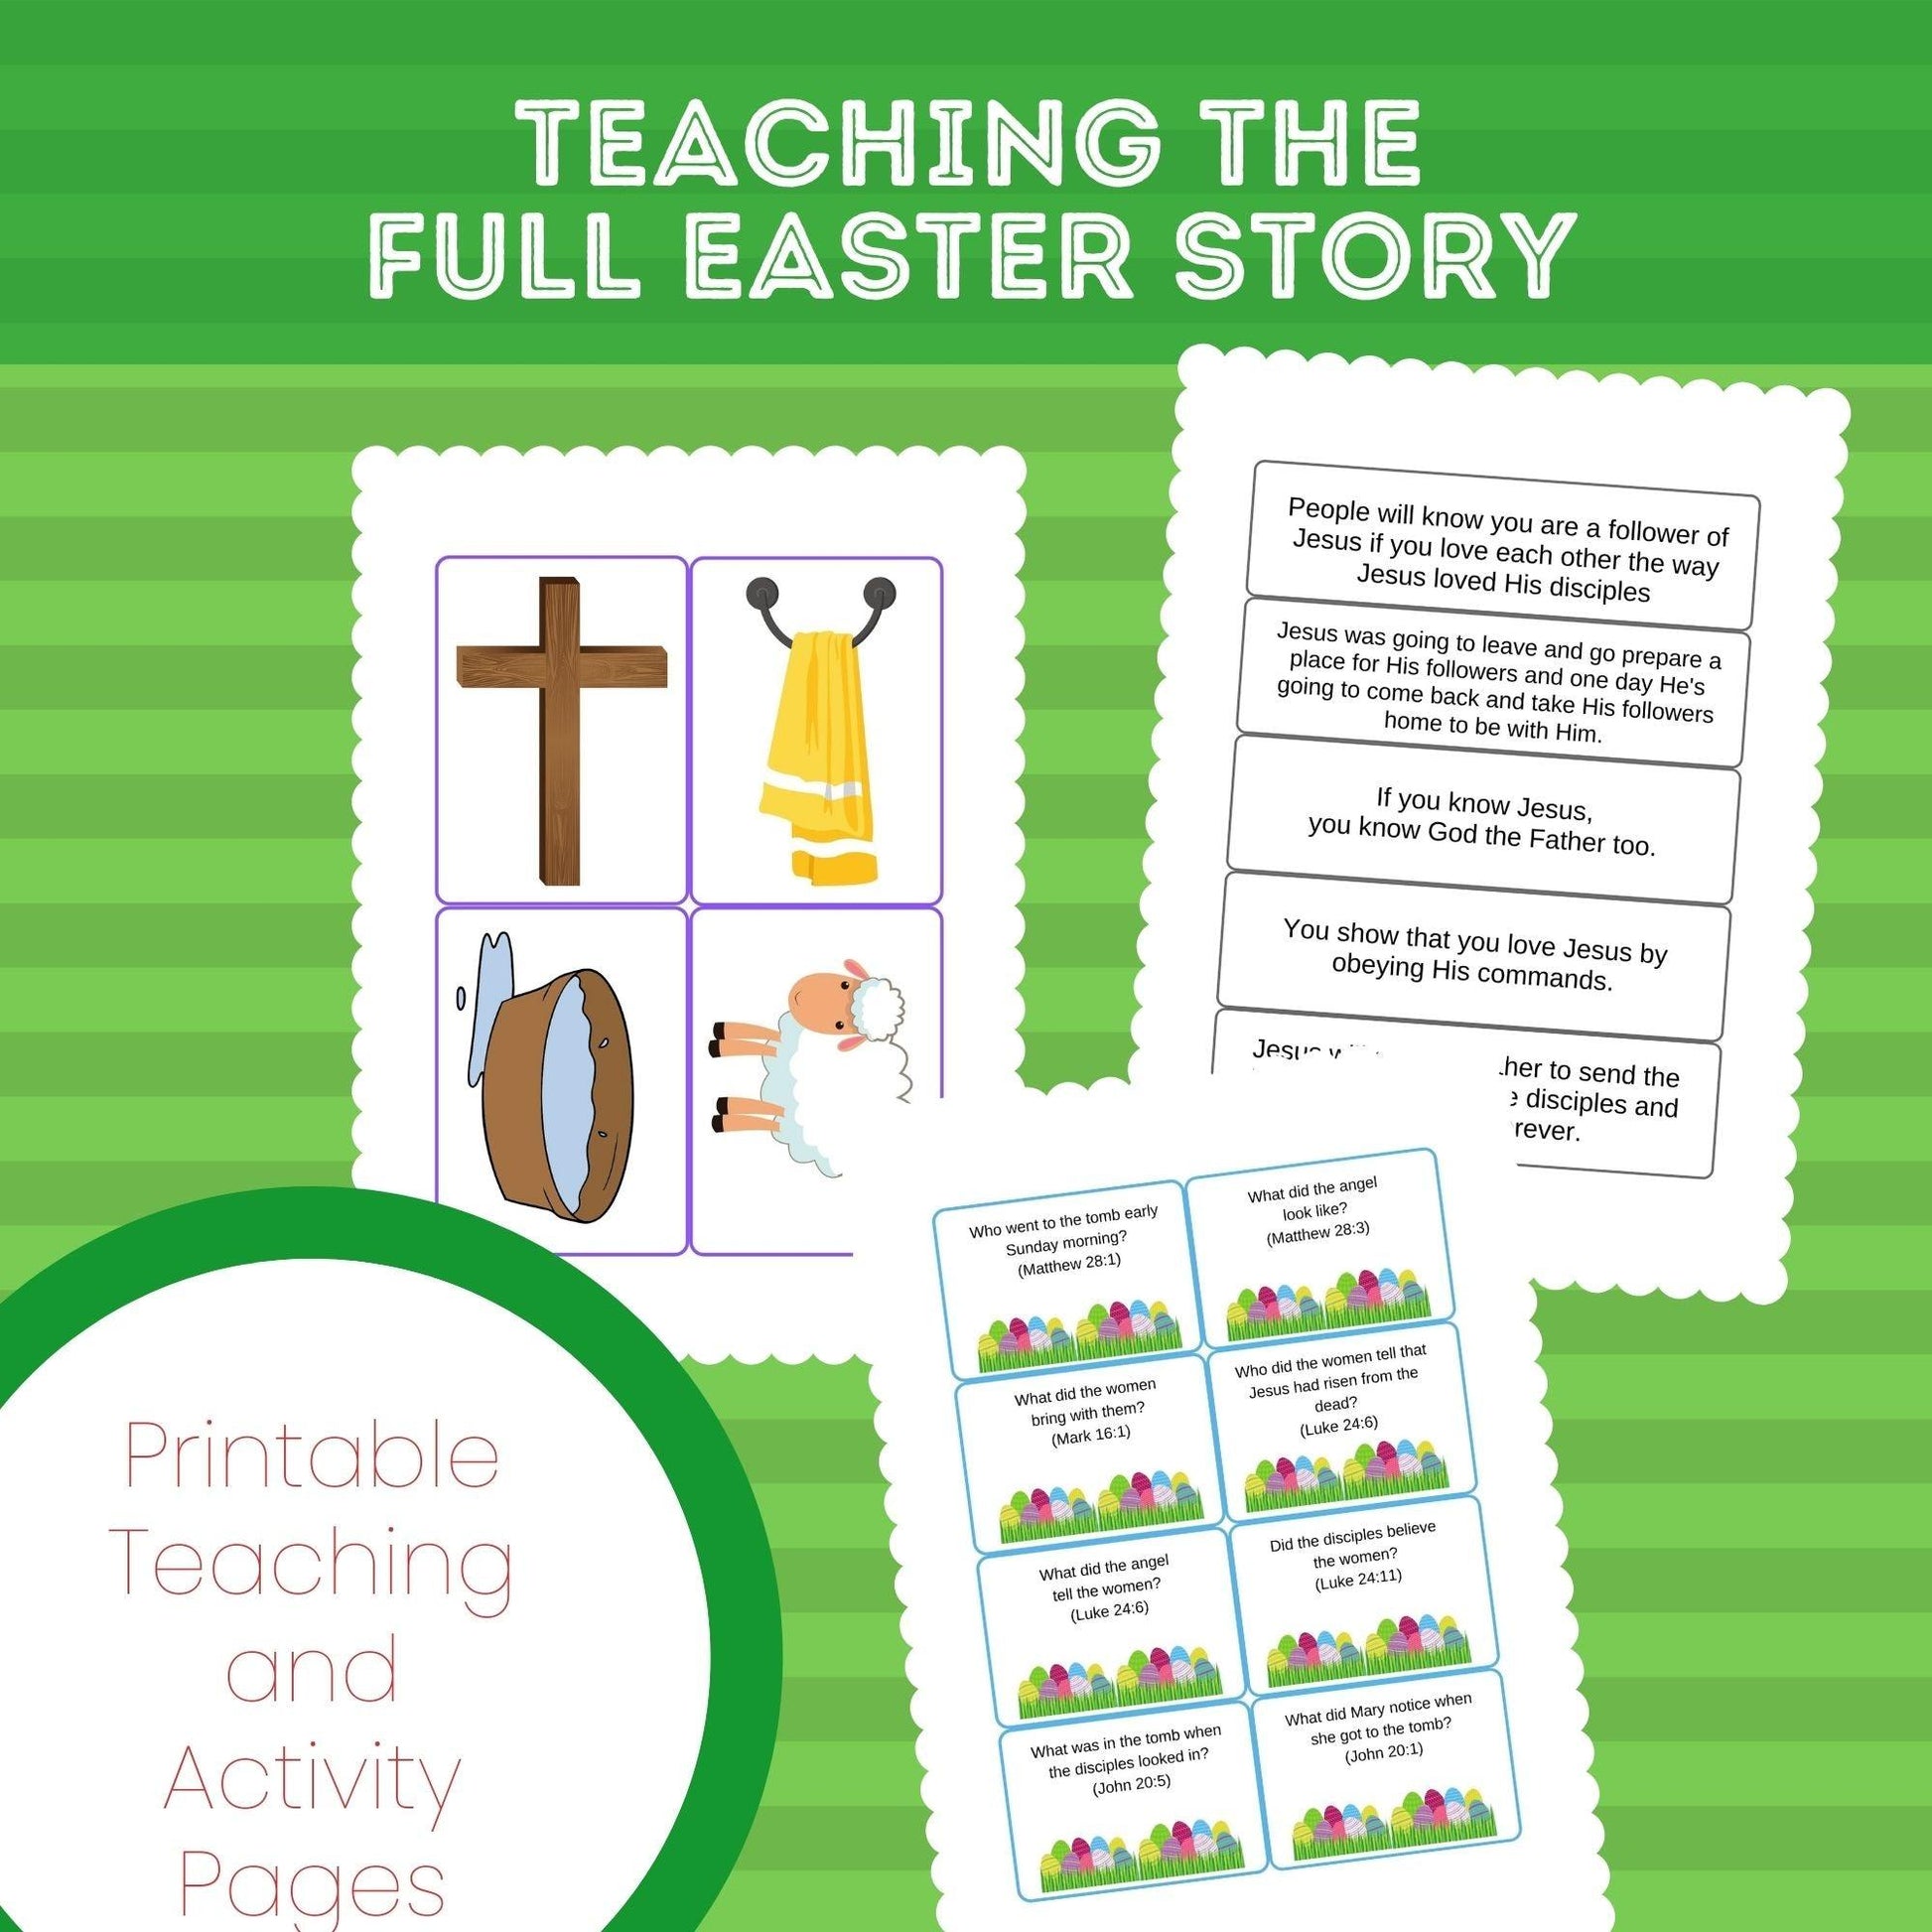 Why Easter? 5-Week Children's Ministry Curriculum (download only) - Sunday School Store 